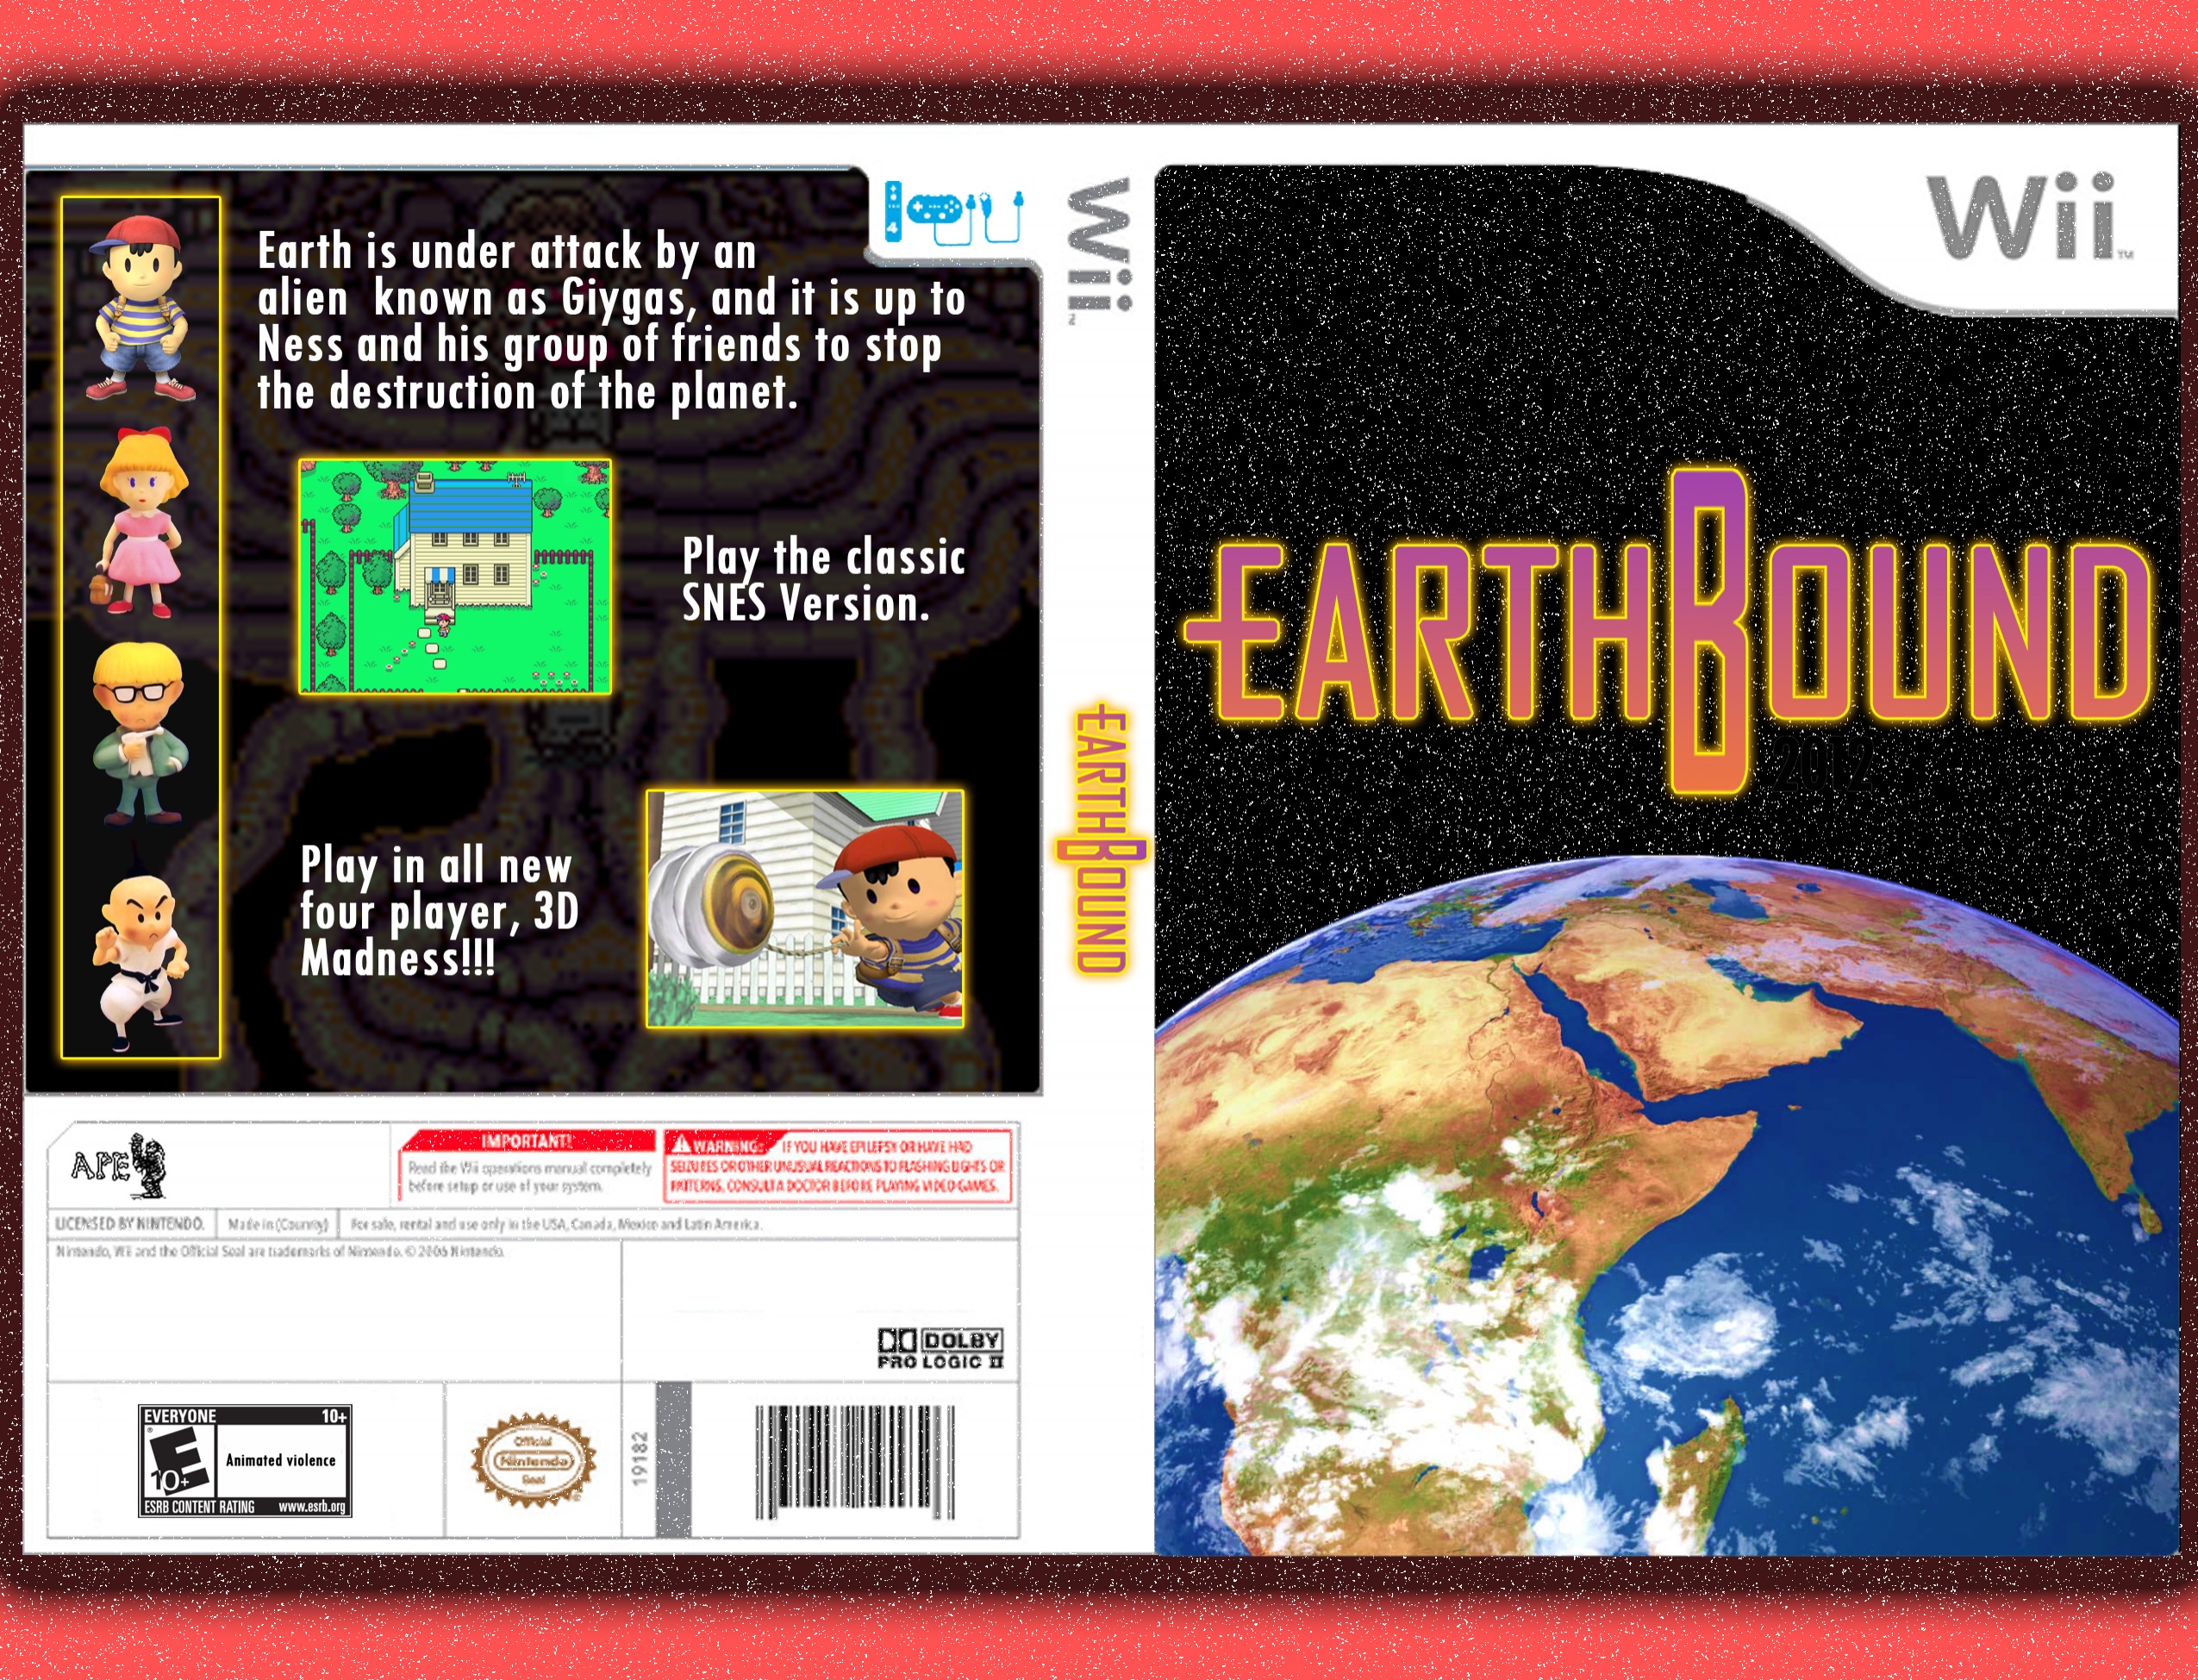 Earthbound 2012 box cover